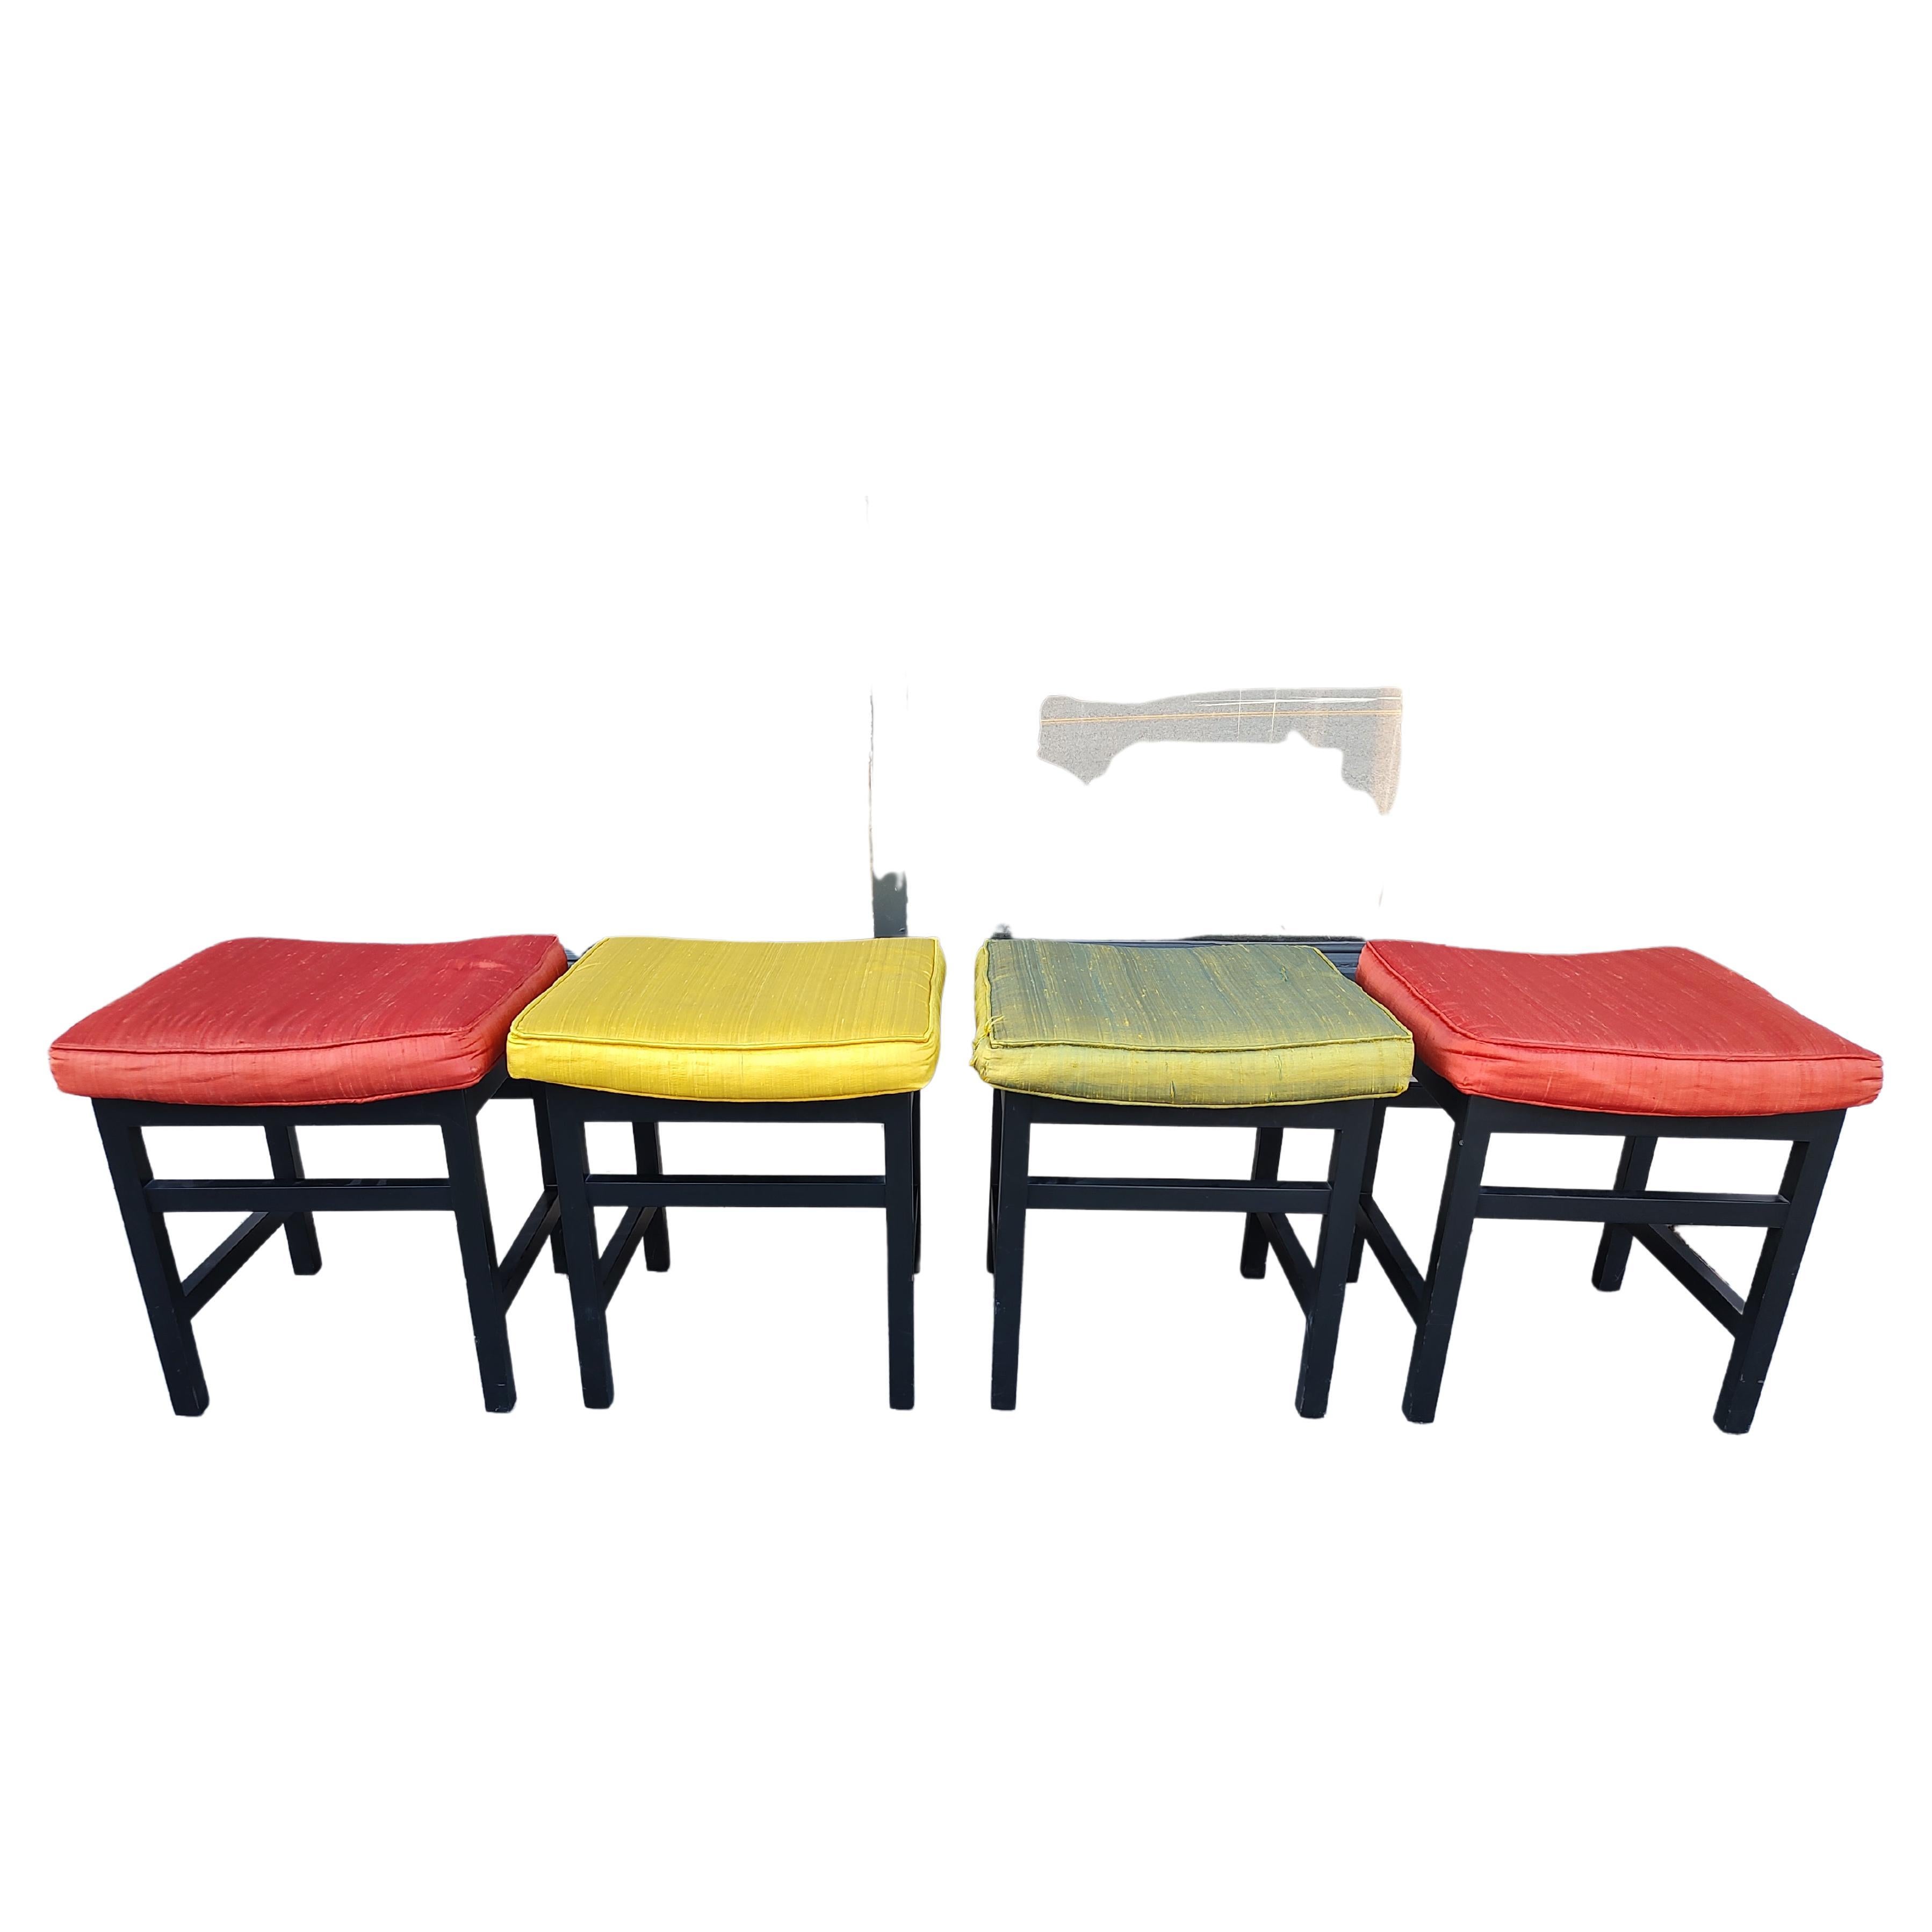 Mid-Century Modern Set of 4 Stools with Silk Upholstery For Sale 2